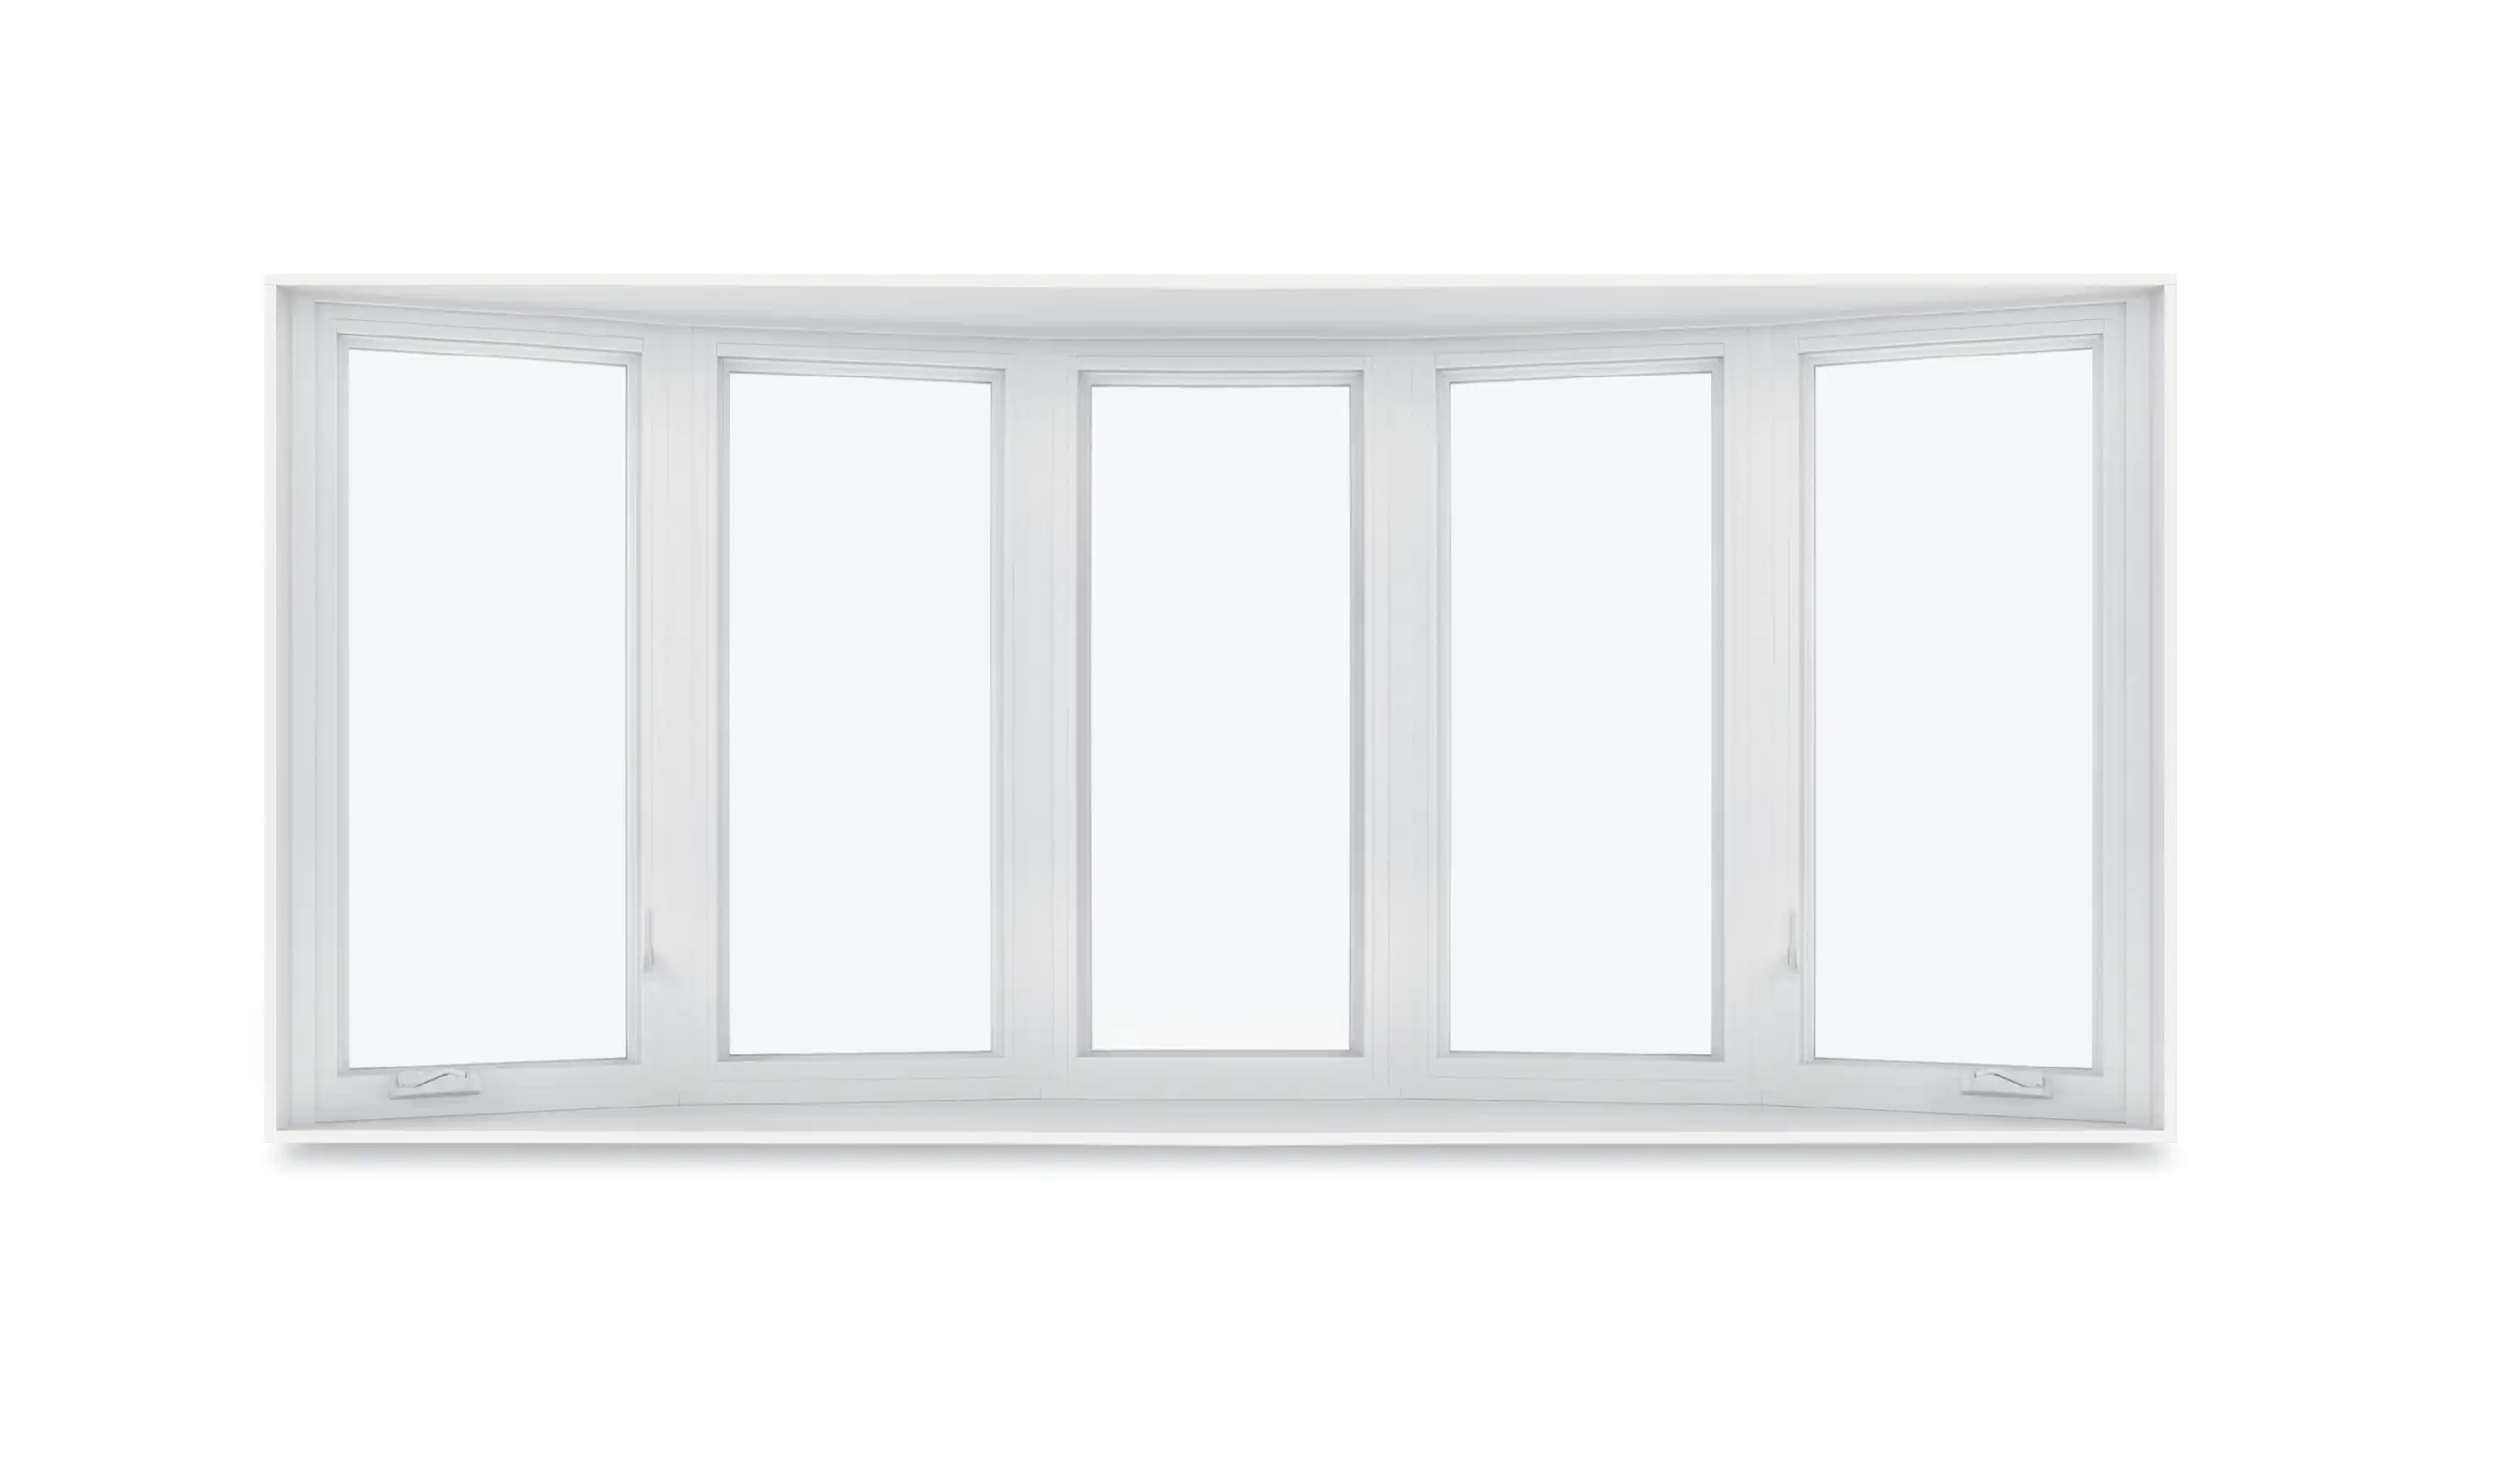 Image of a white five-wide Marvin Replacement Bow window with flanking Casement windows.